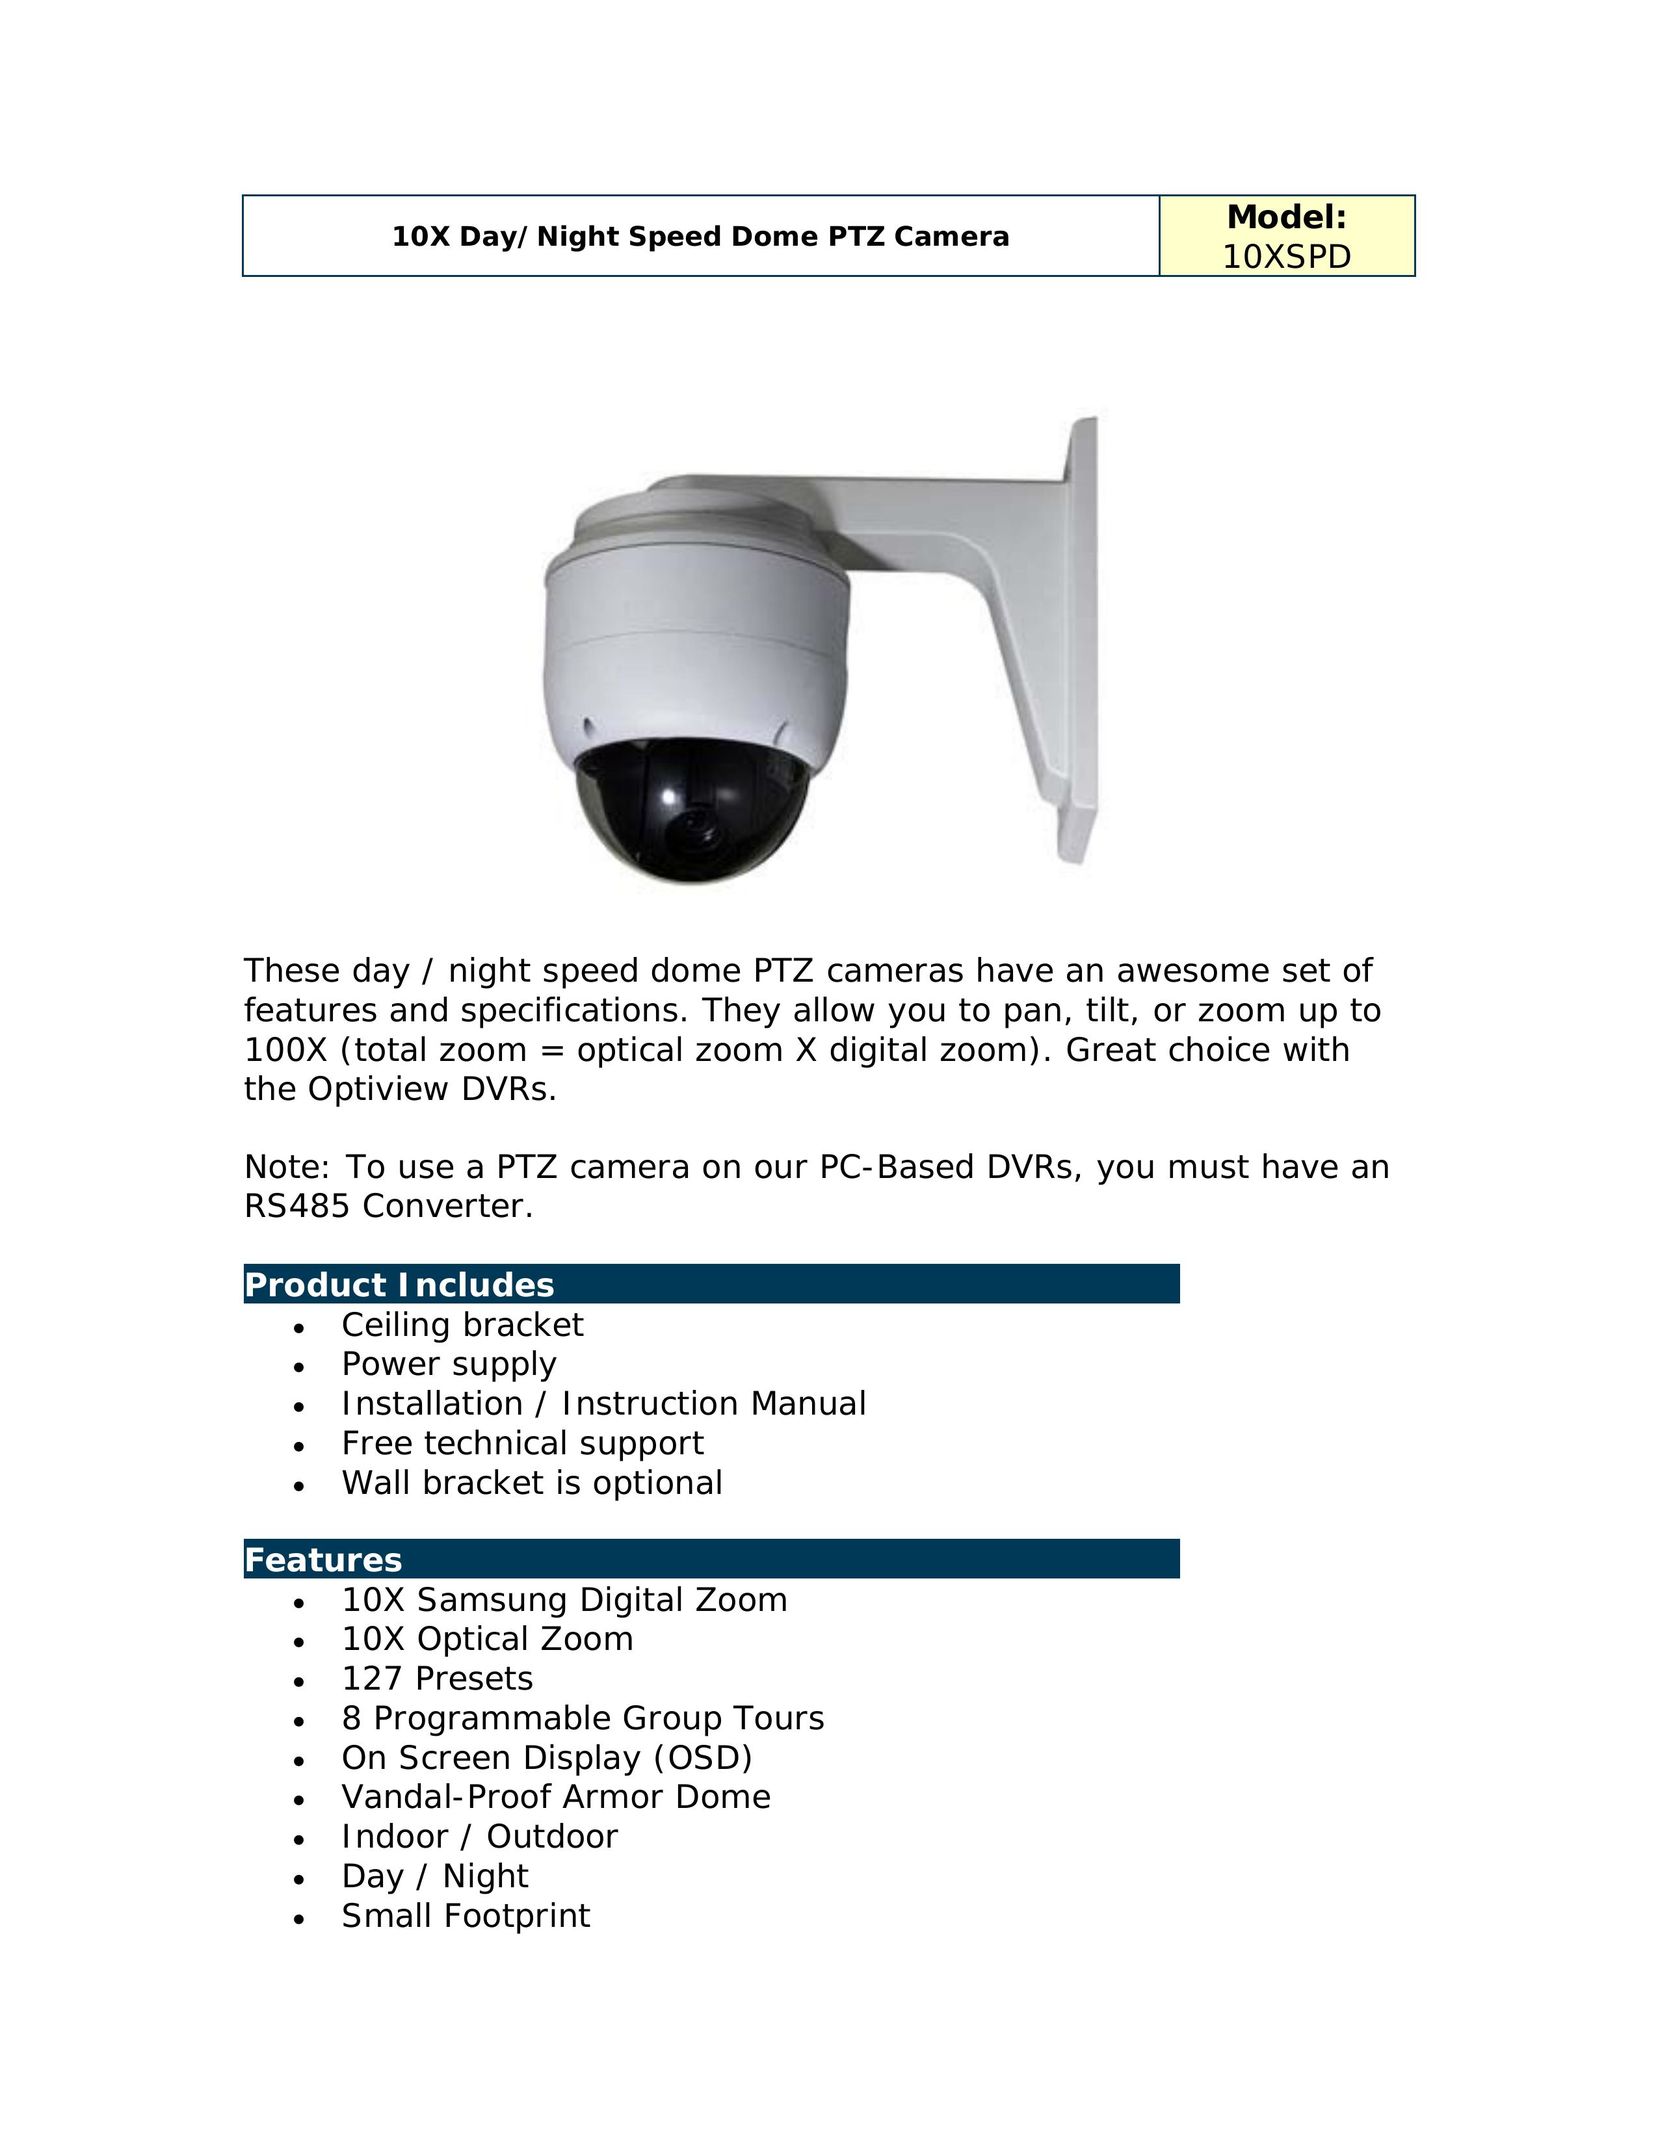 Optiview 10XSPD Home Security System User Manual